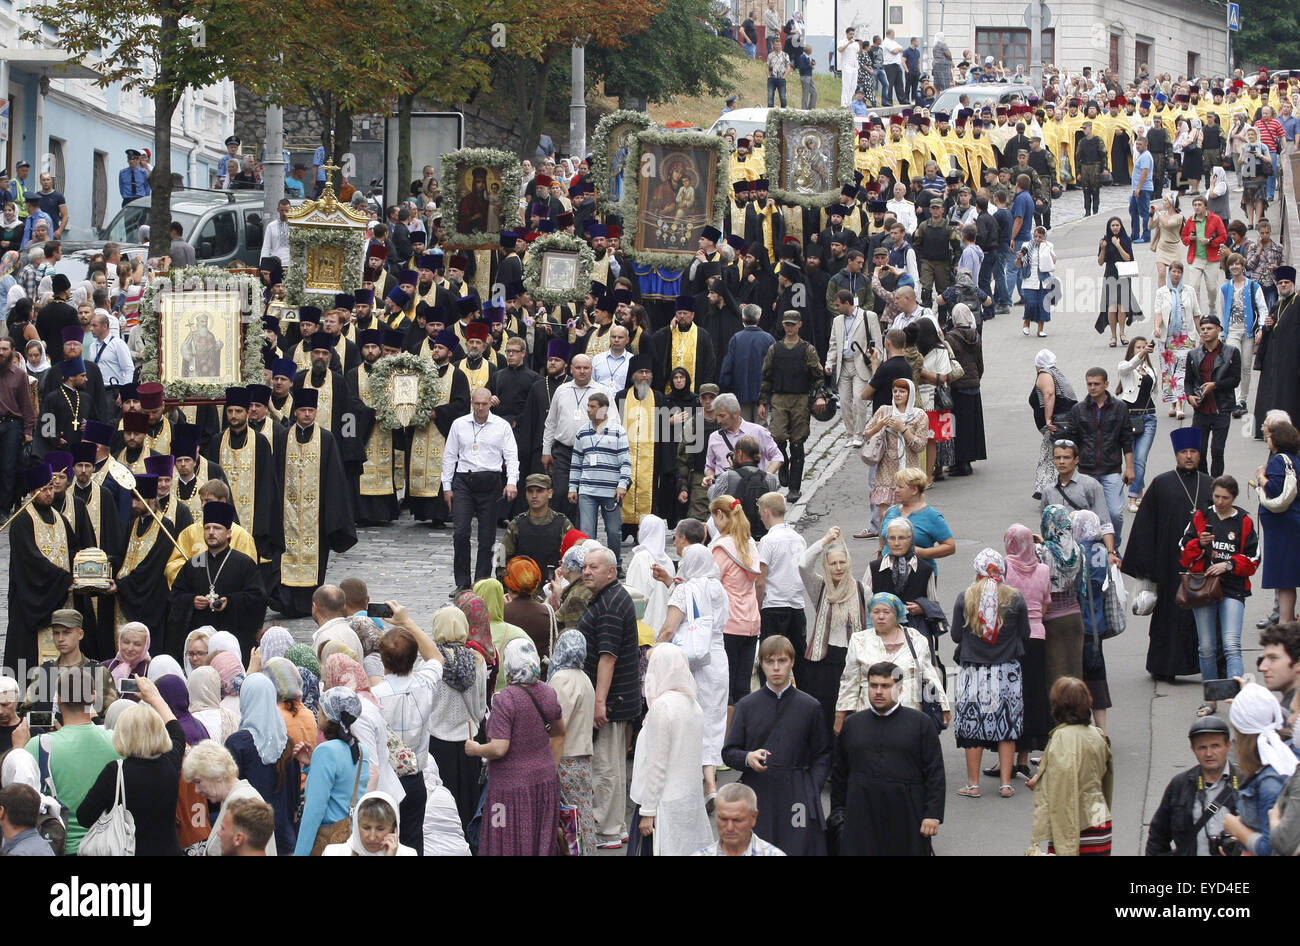 July 27, 2015 - Kiev, Ukraine - Priests from the Ukrainian Orthodox Church of Moscow Patriarchate carry icons as they march during an event marking the 1000th anniversary of the Repose of Vladimir the Great at St. Vladimirs Hill in Kiev, Ukraine, 27 July 2015. The Grand Prince of Kiev, Vladimir the Great, also known as St. Vladimir, Vladimir the Baptizer of Rus and Vladimir the Red Sun, was the first Christian ruler in the Kievan Rus who christianized the region. Orthodox believers will mark the 1027th anniversary of Kievan Rus Christianization on 28 July. (Credit Image: © Serg Glovny via ZUMA Stock Photo